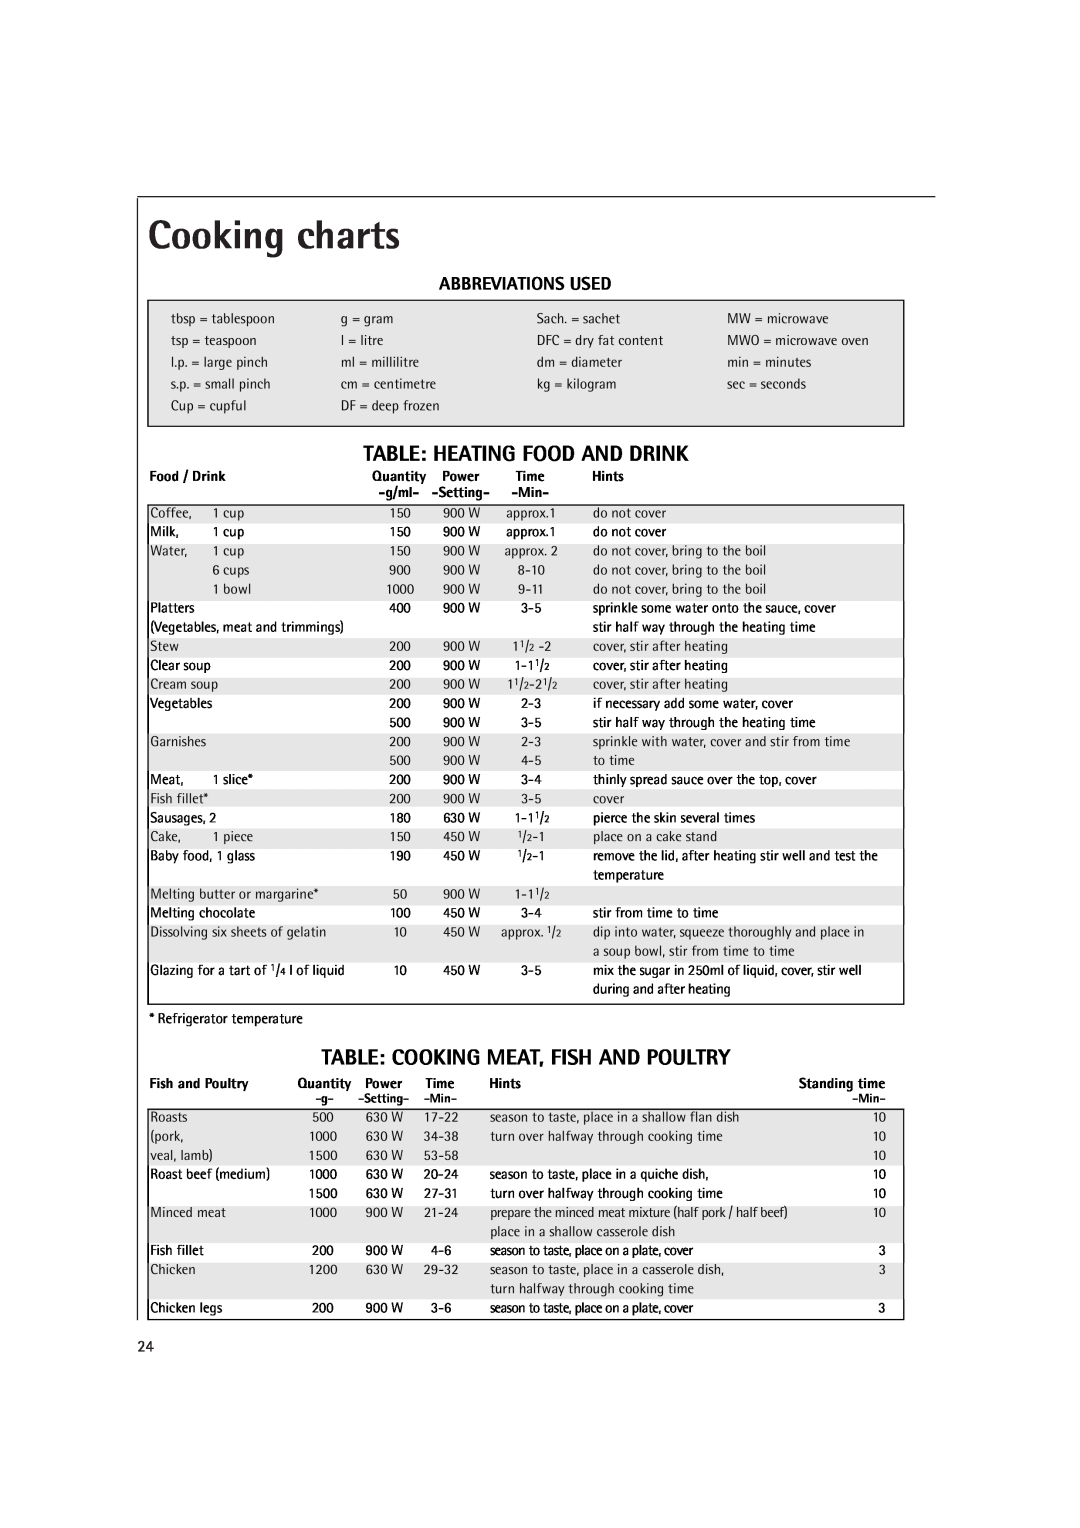 AEG MC2660E Cooking charts, Table Heating Food And Drink, Table Cooking Meat, Fish And Poultry, Abbreviations Used, Power 